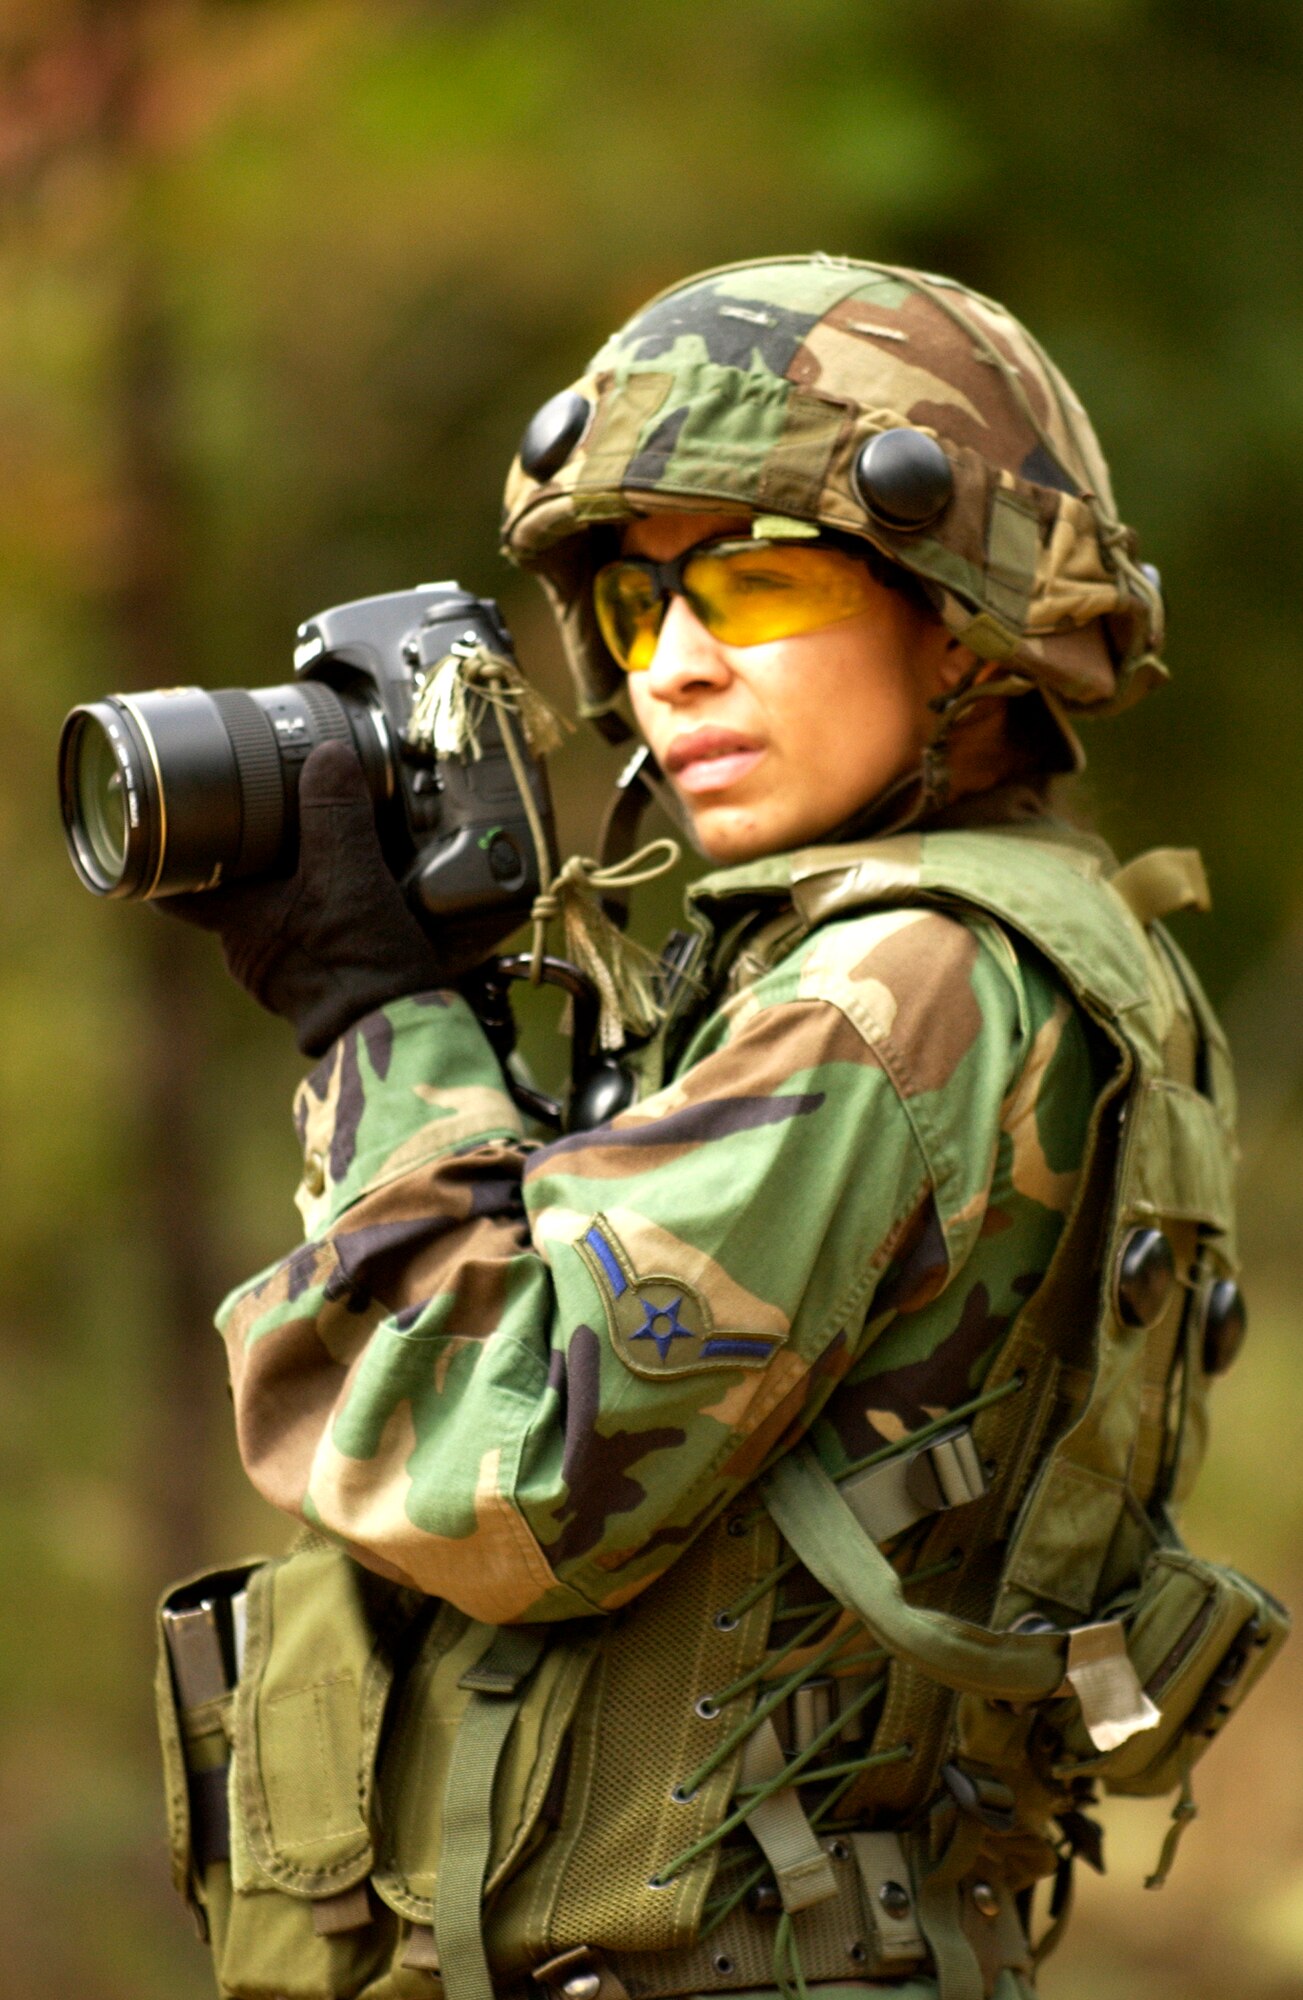 Airman Stephanie Longoria, 30th Space Communications Squadron, prepares to take a photograph during the "Ability To Survive and Operate" training at the North Auxillary Field, S.C.,  Oct. 18, 2006. The ATSO training was held by the 1st Combat Camera Squadronand is an annual exercise designed to train Airmen for real world contingencies and combat operations.  (U.S. Air Force photo by Airman 1st Class Christopher Hubenthal)